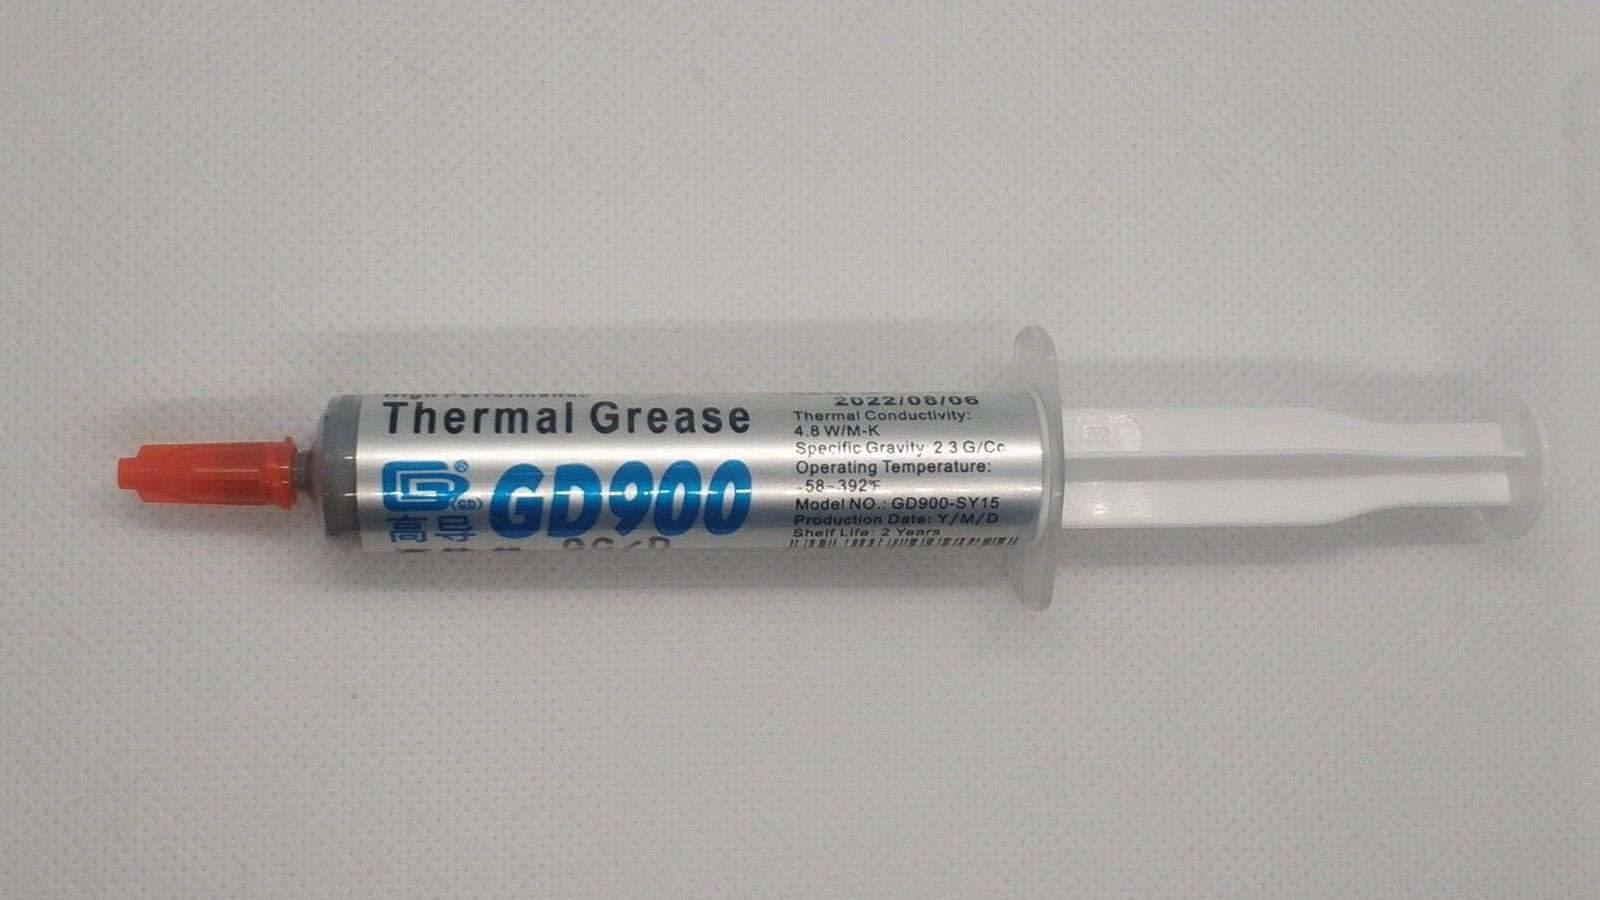 GD900 Thermal Paste / Grease, 4.8 W/mK, 3-30g Tube, USA stock